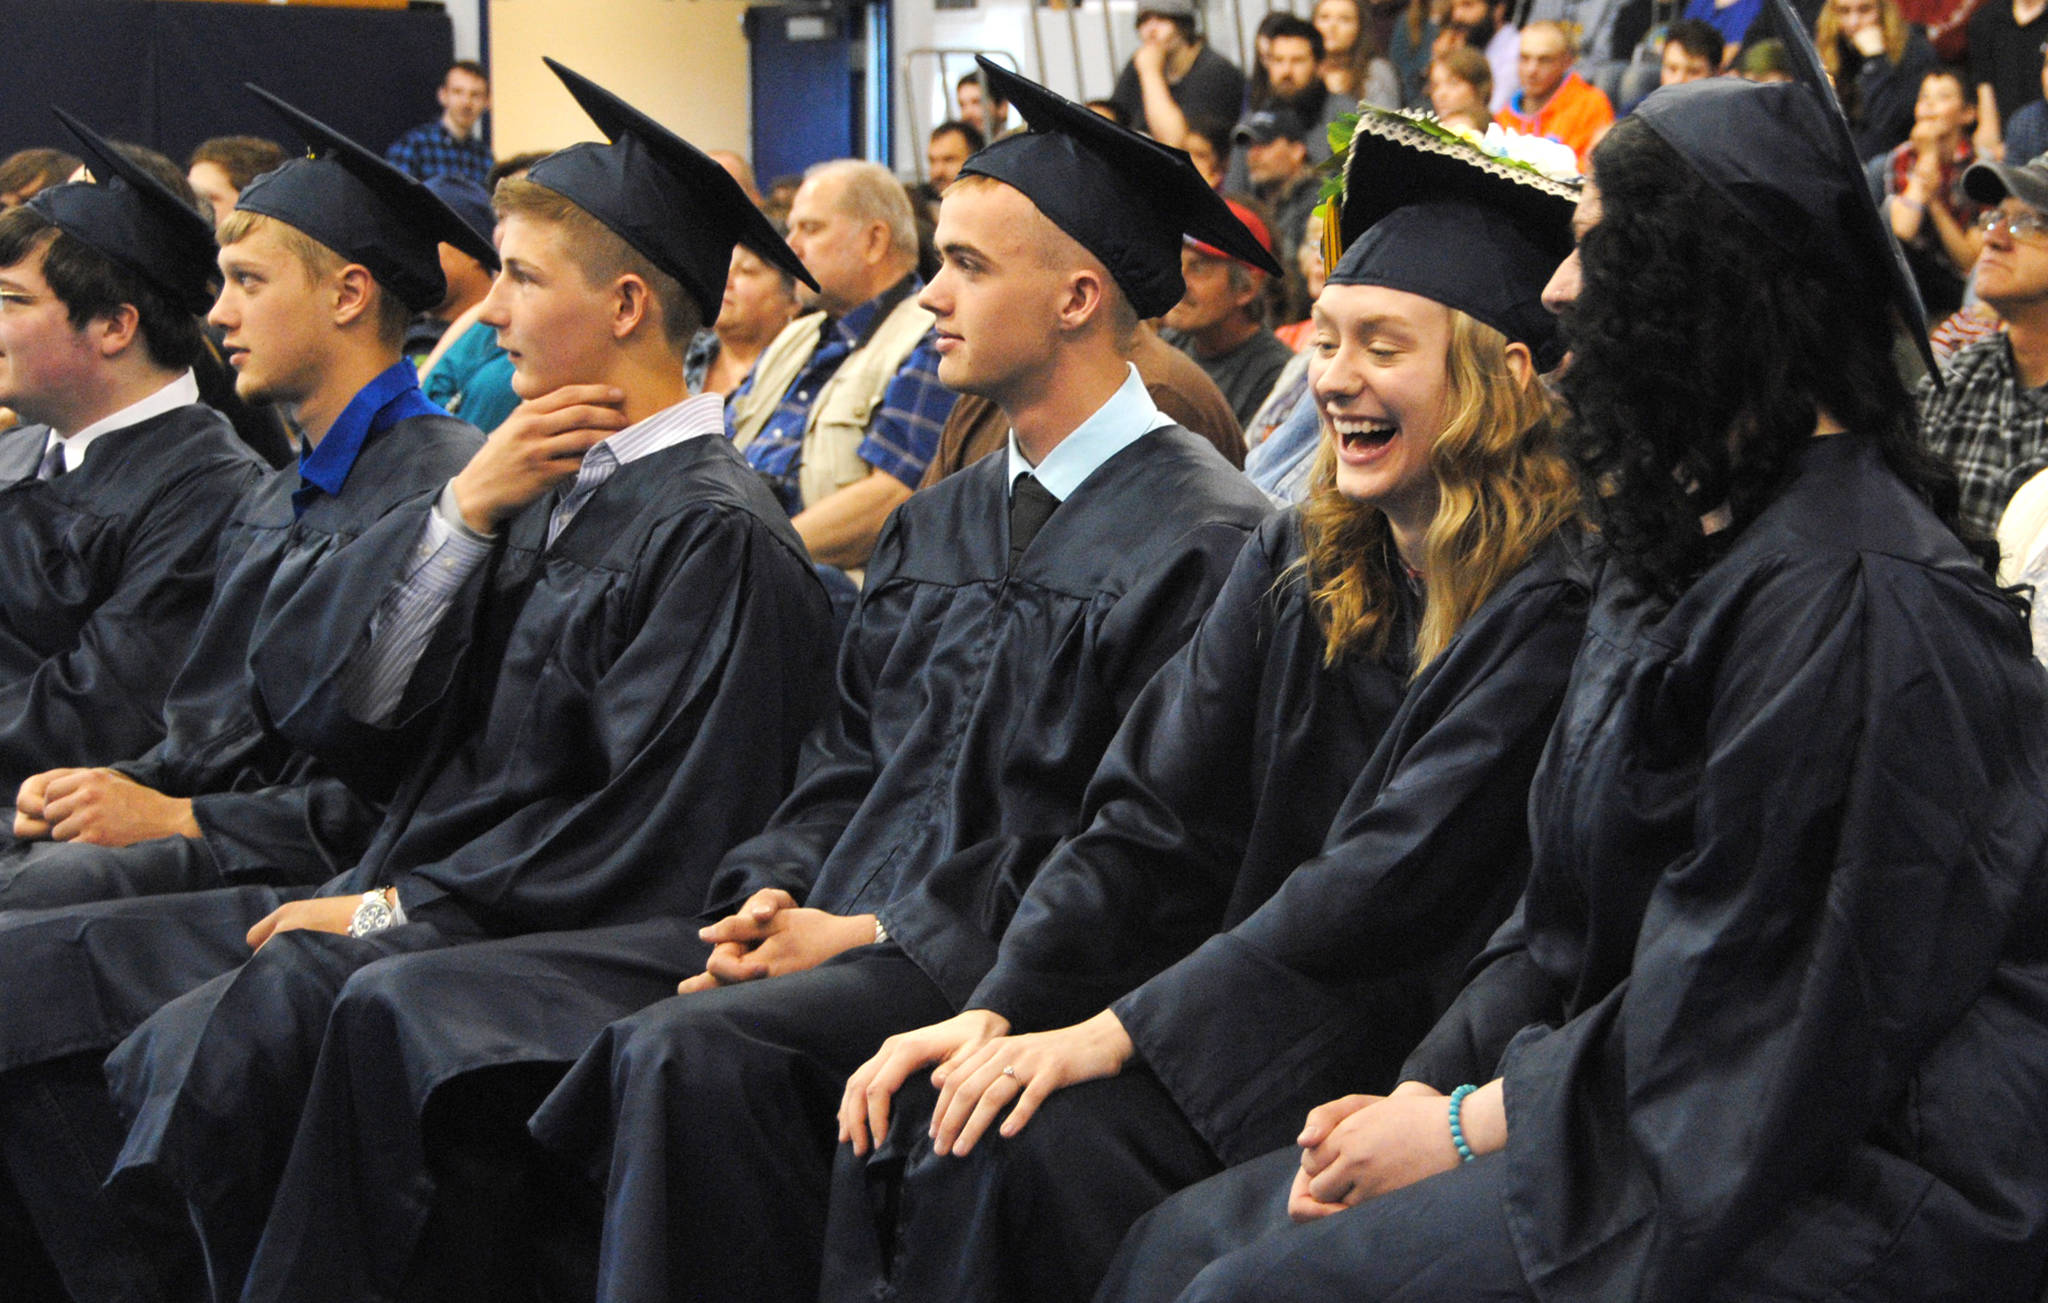 Tatiana Cooper, laughing, of Ninilchik's graduating class reacts to Barbara Denboer's commencement address during the graduation ceremony on May 24, 2017 in the Ninilchik School Gym in Ninilchik, Alaska. (Kat Sorensen/Peninsula Clarion)